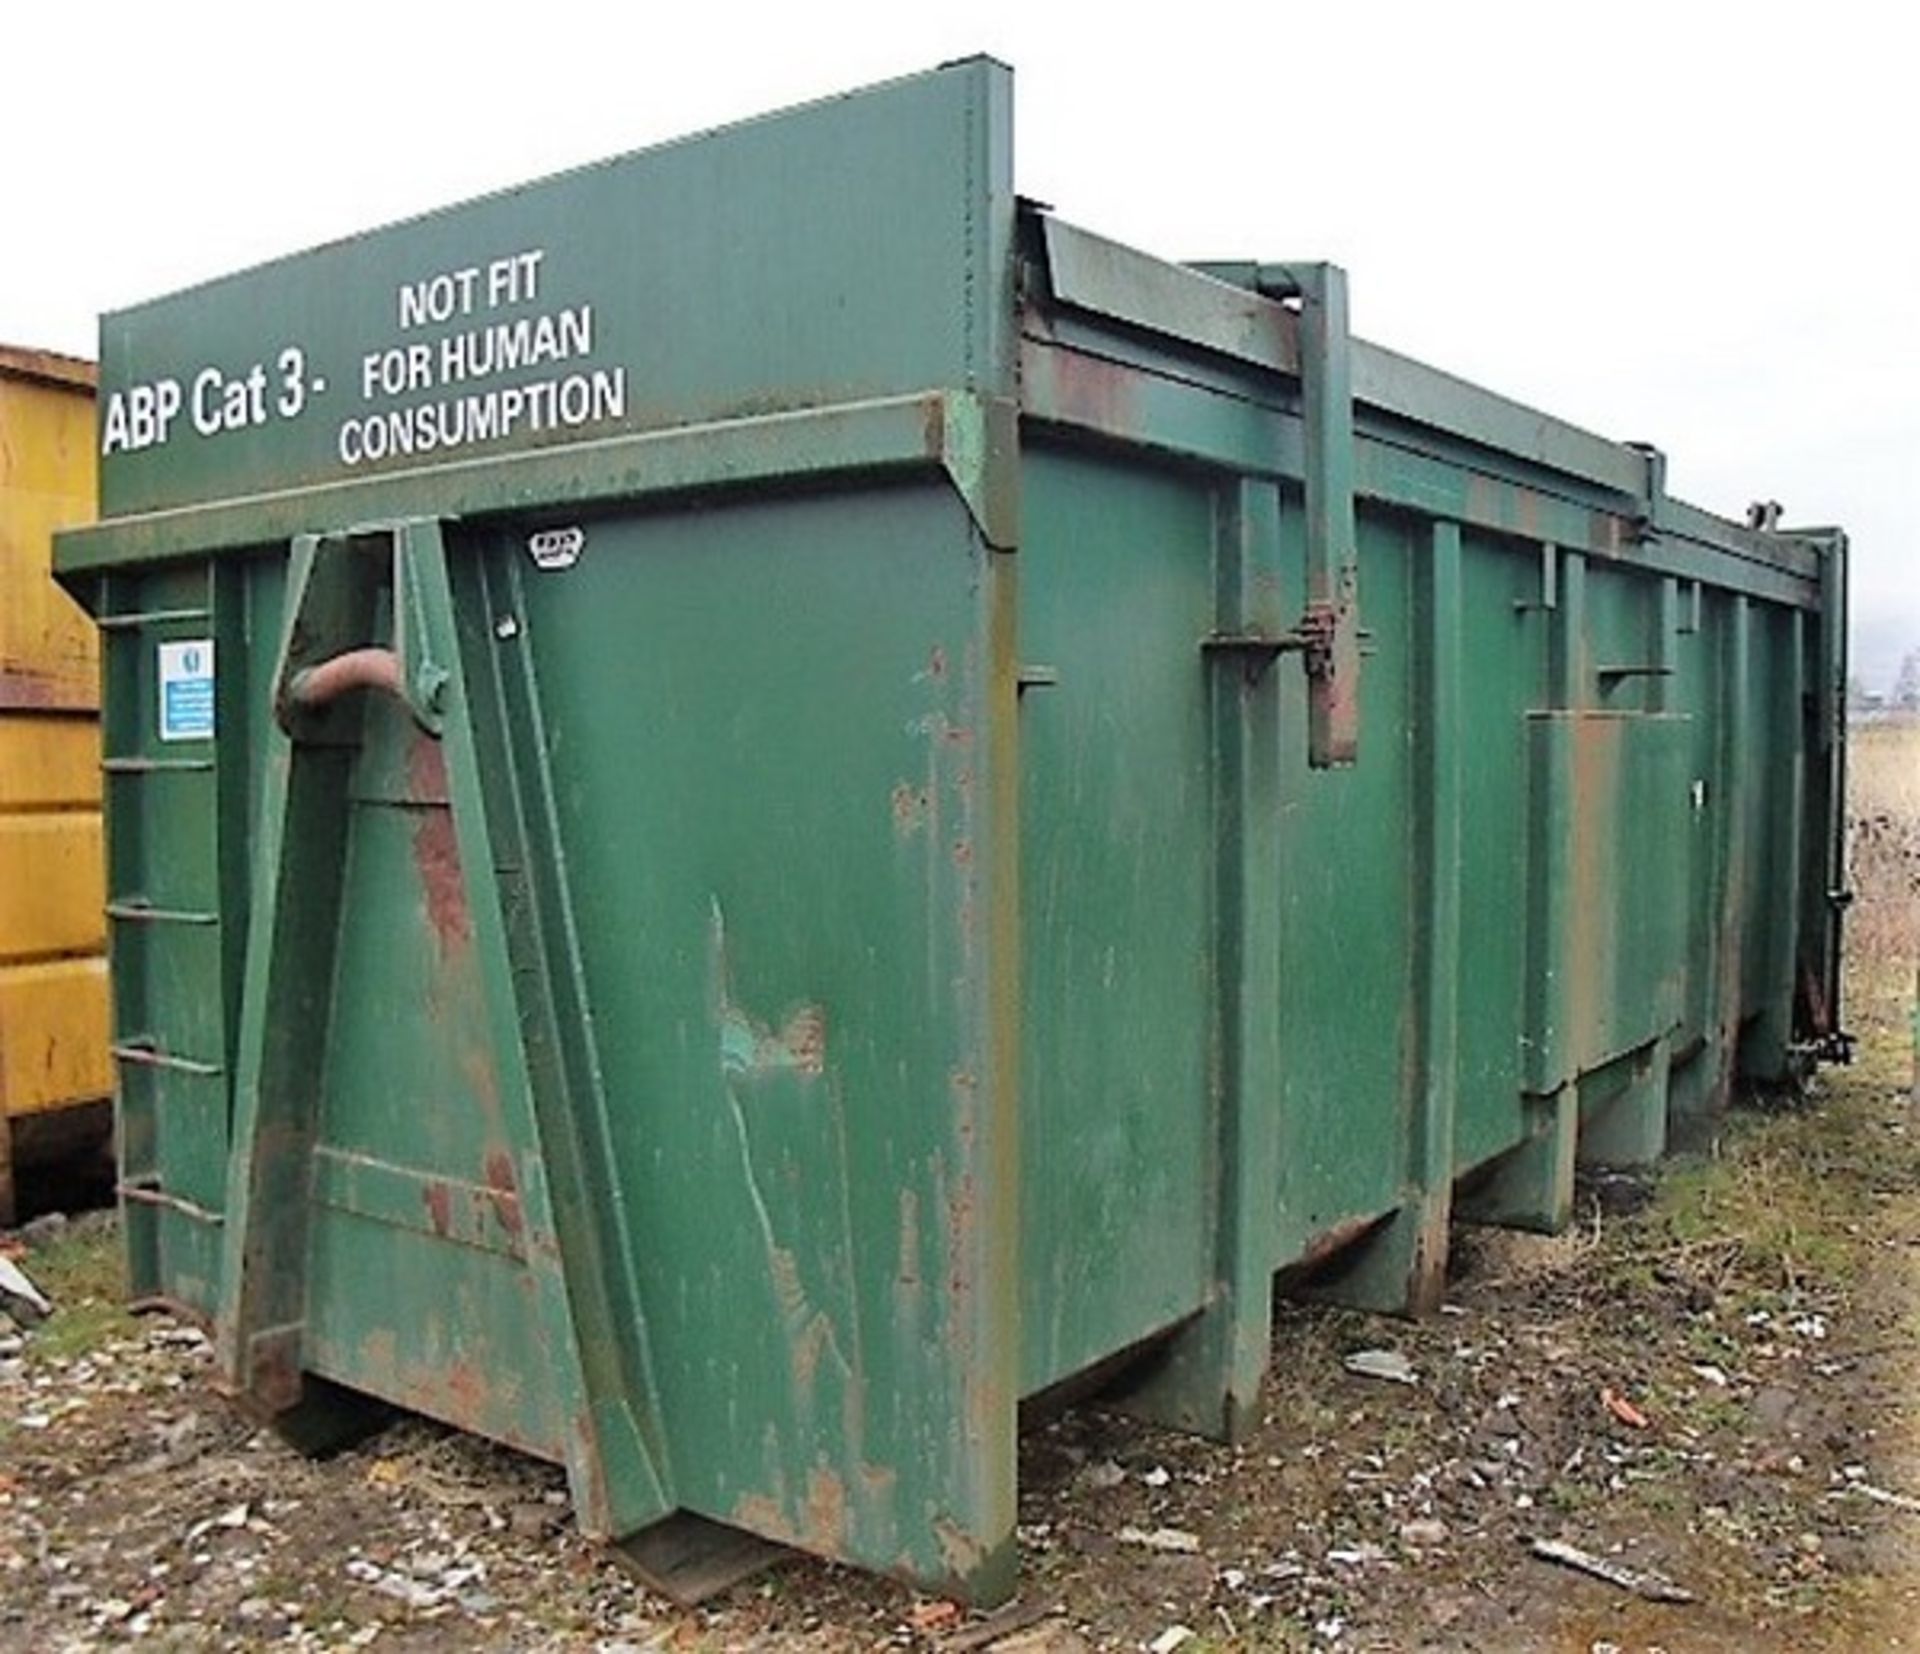 FOOD WASTE SKIP C/W ENCLOSED TOP. MANUFACTURED BY C F BOOTH. SOLD FROM ERROL AUCTION SITE. VIEWING A